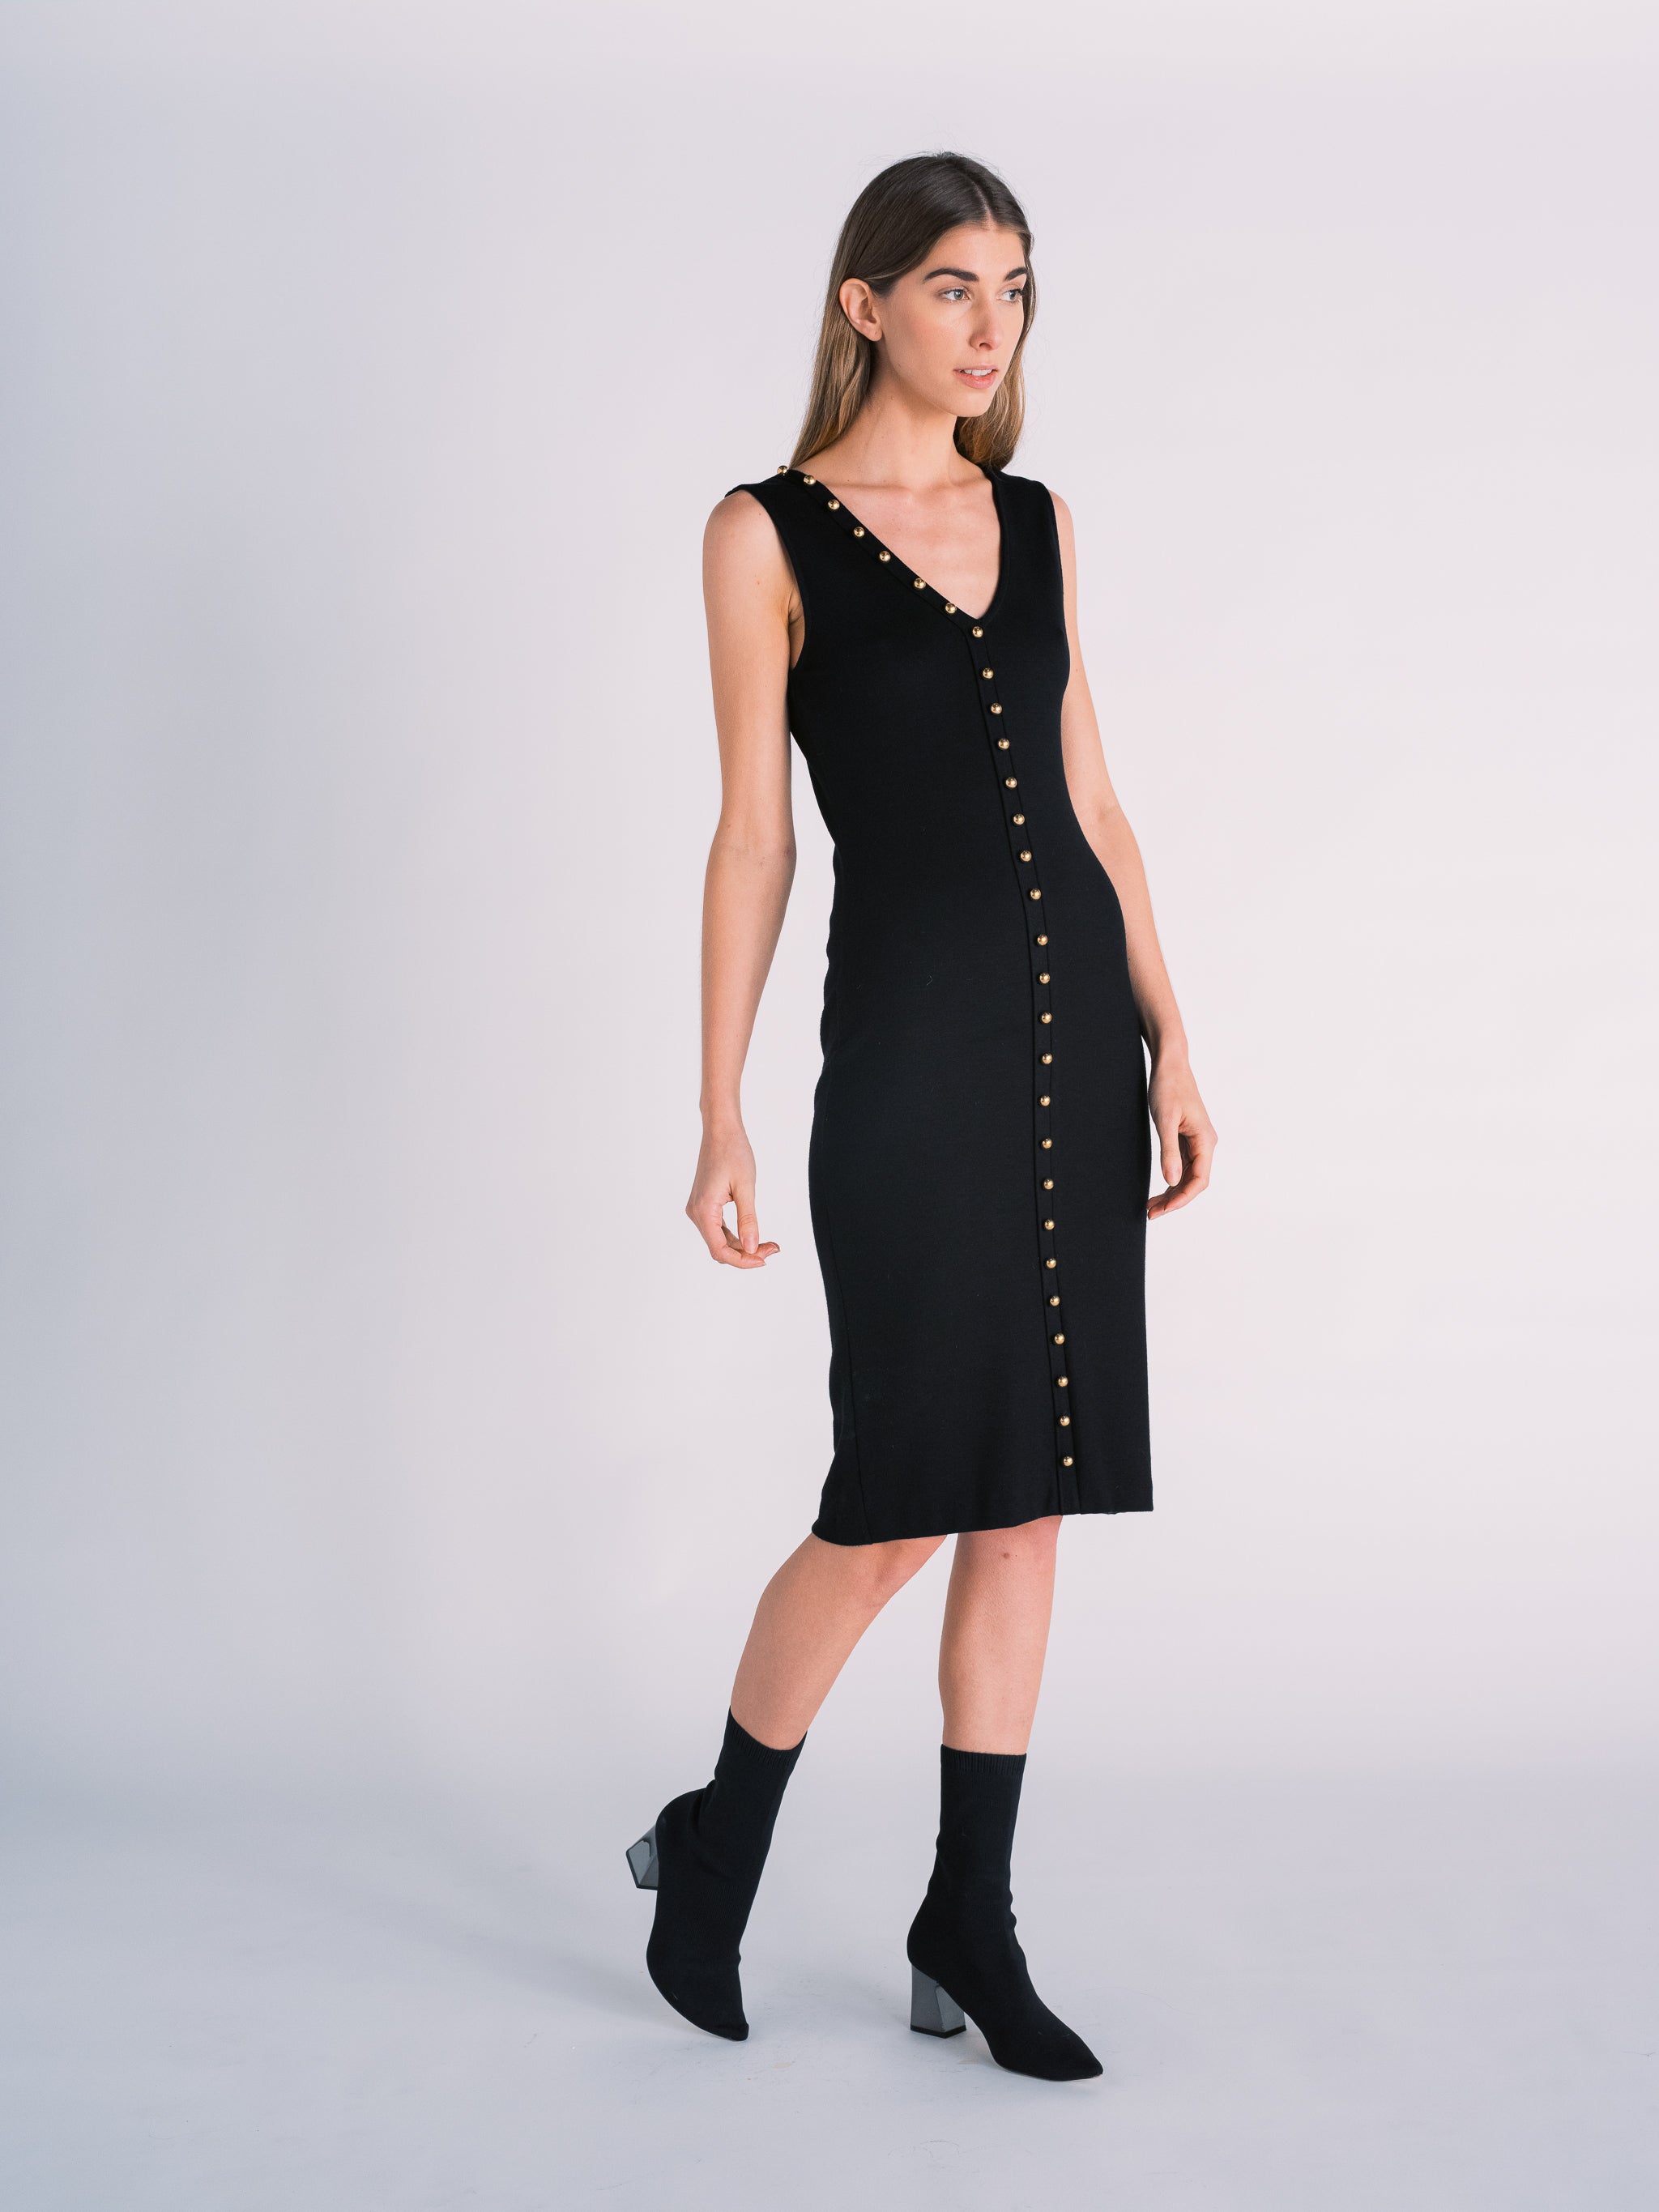 Knit Black Midi Dress with Gold Buttons